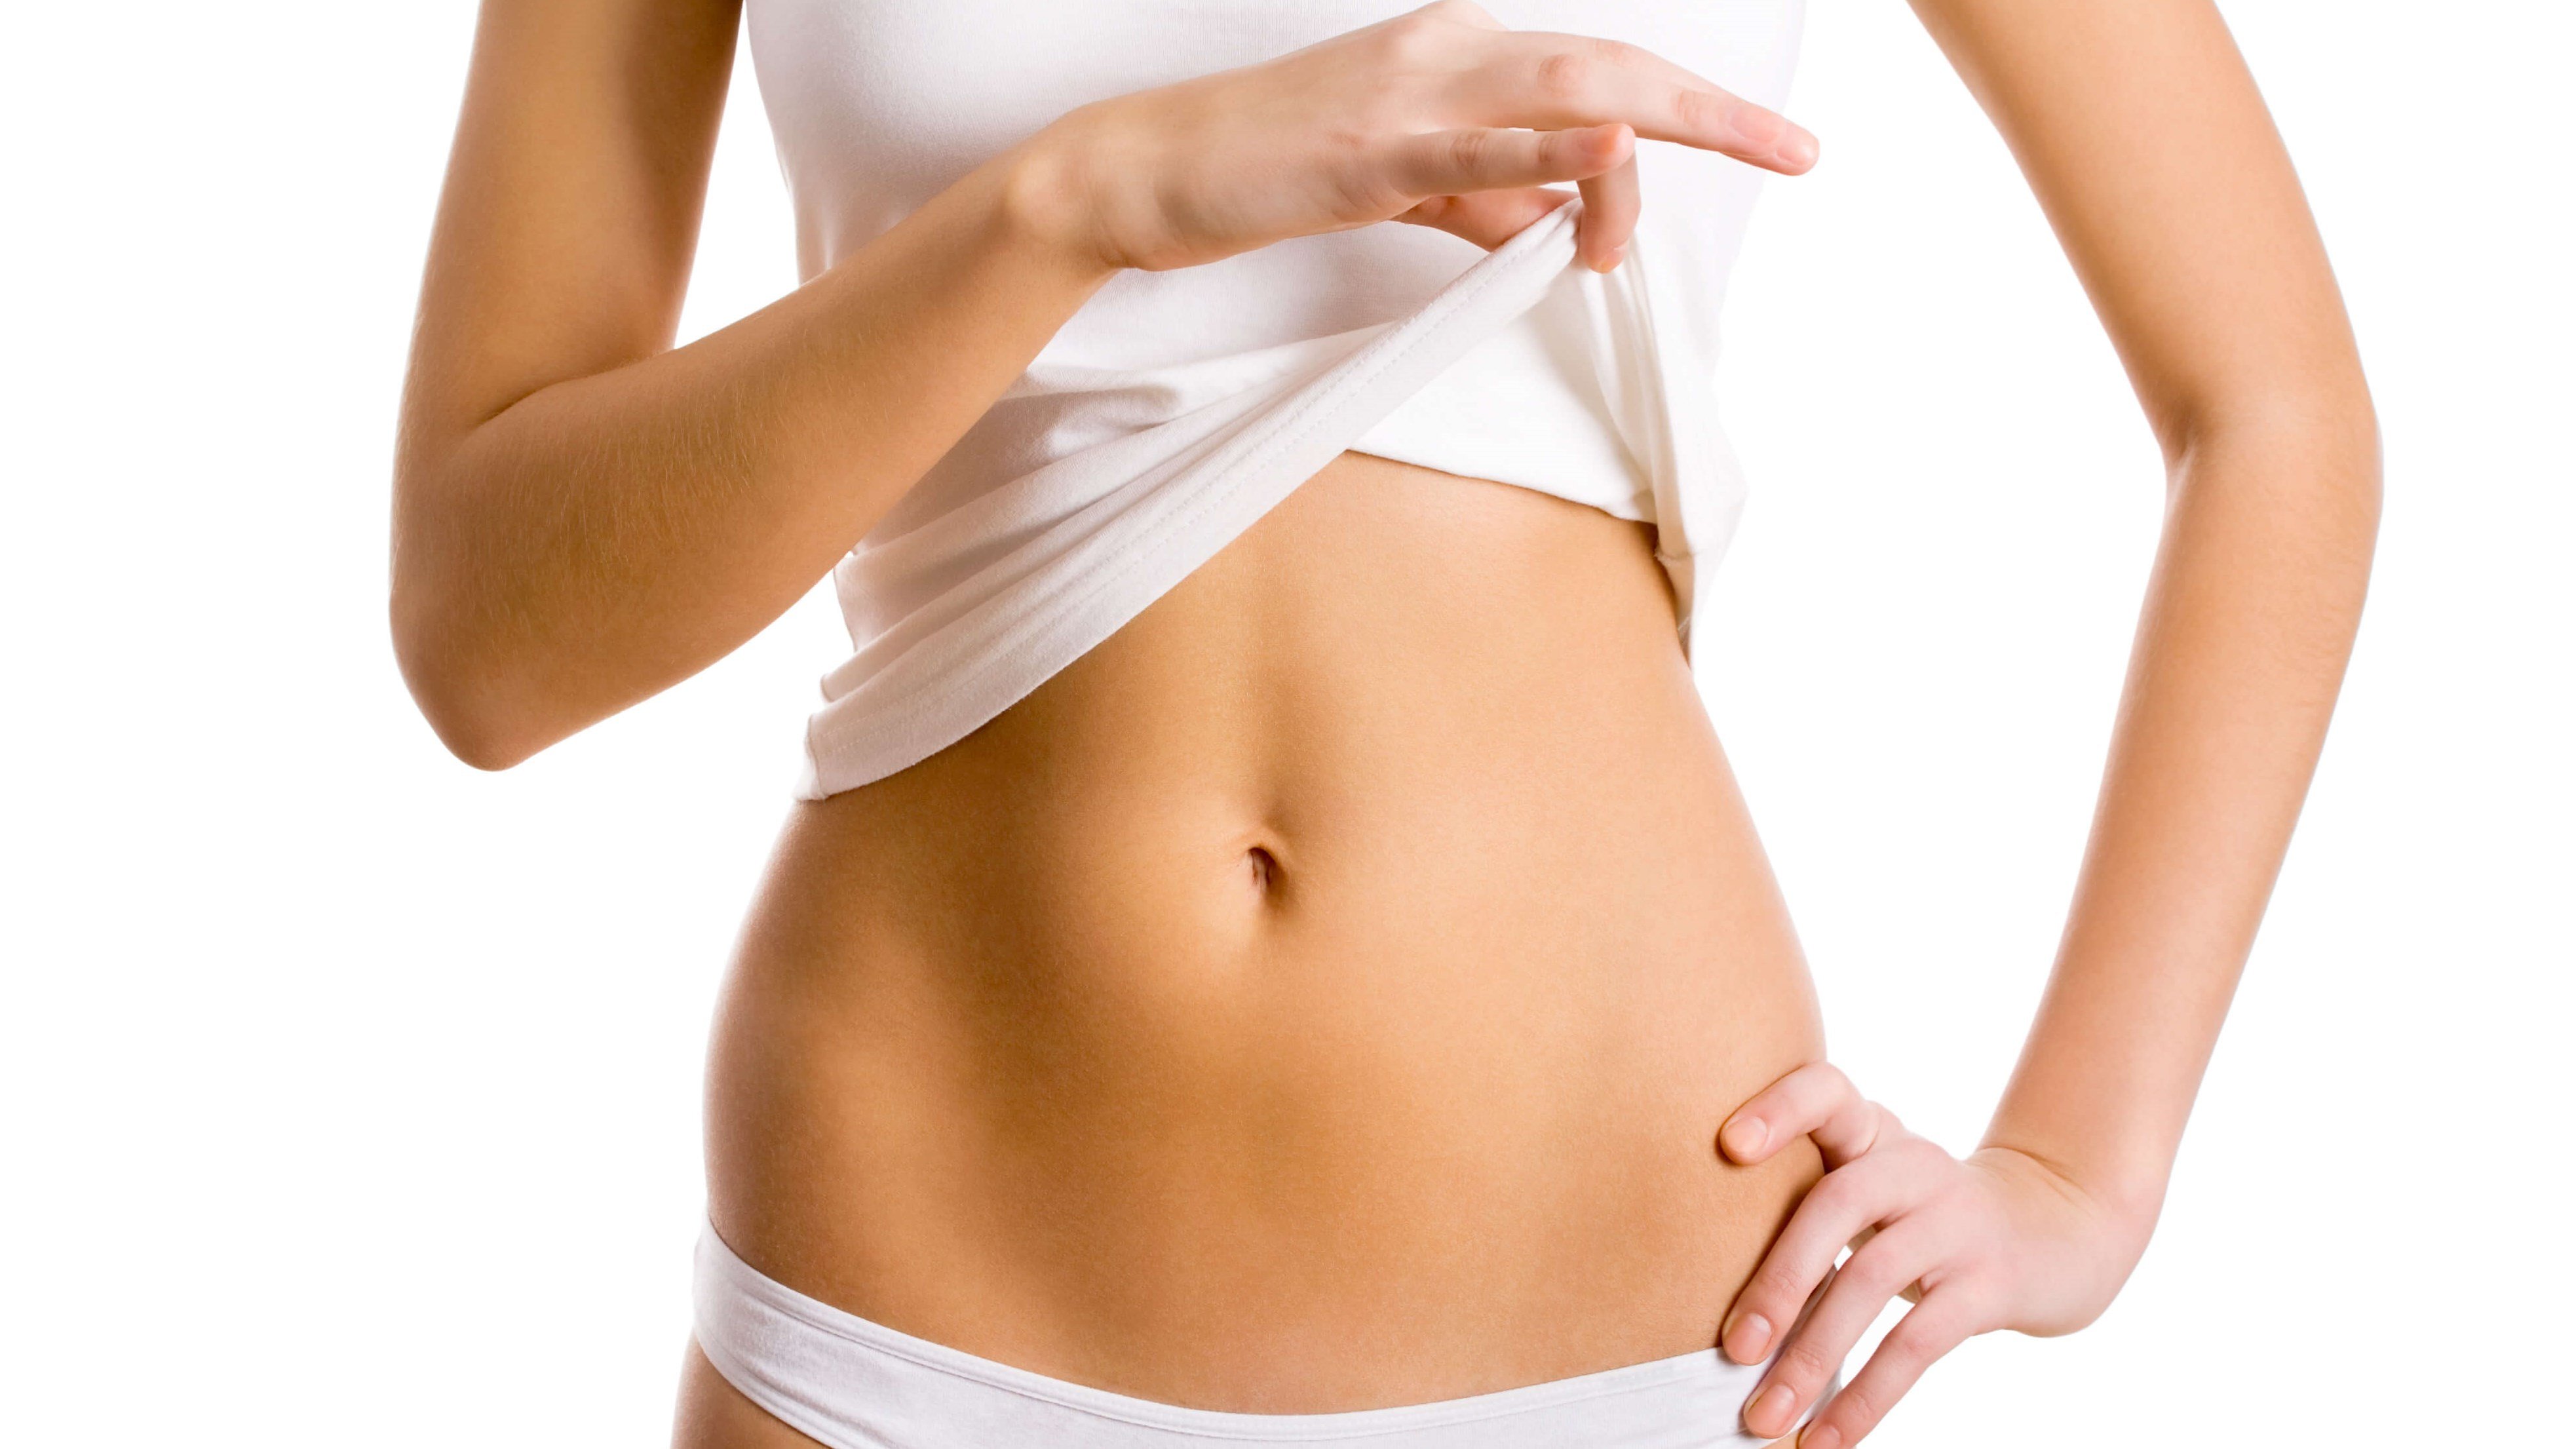 How Visible Are Tummy Tuck Scars?